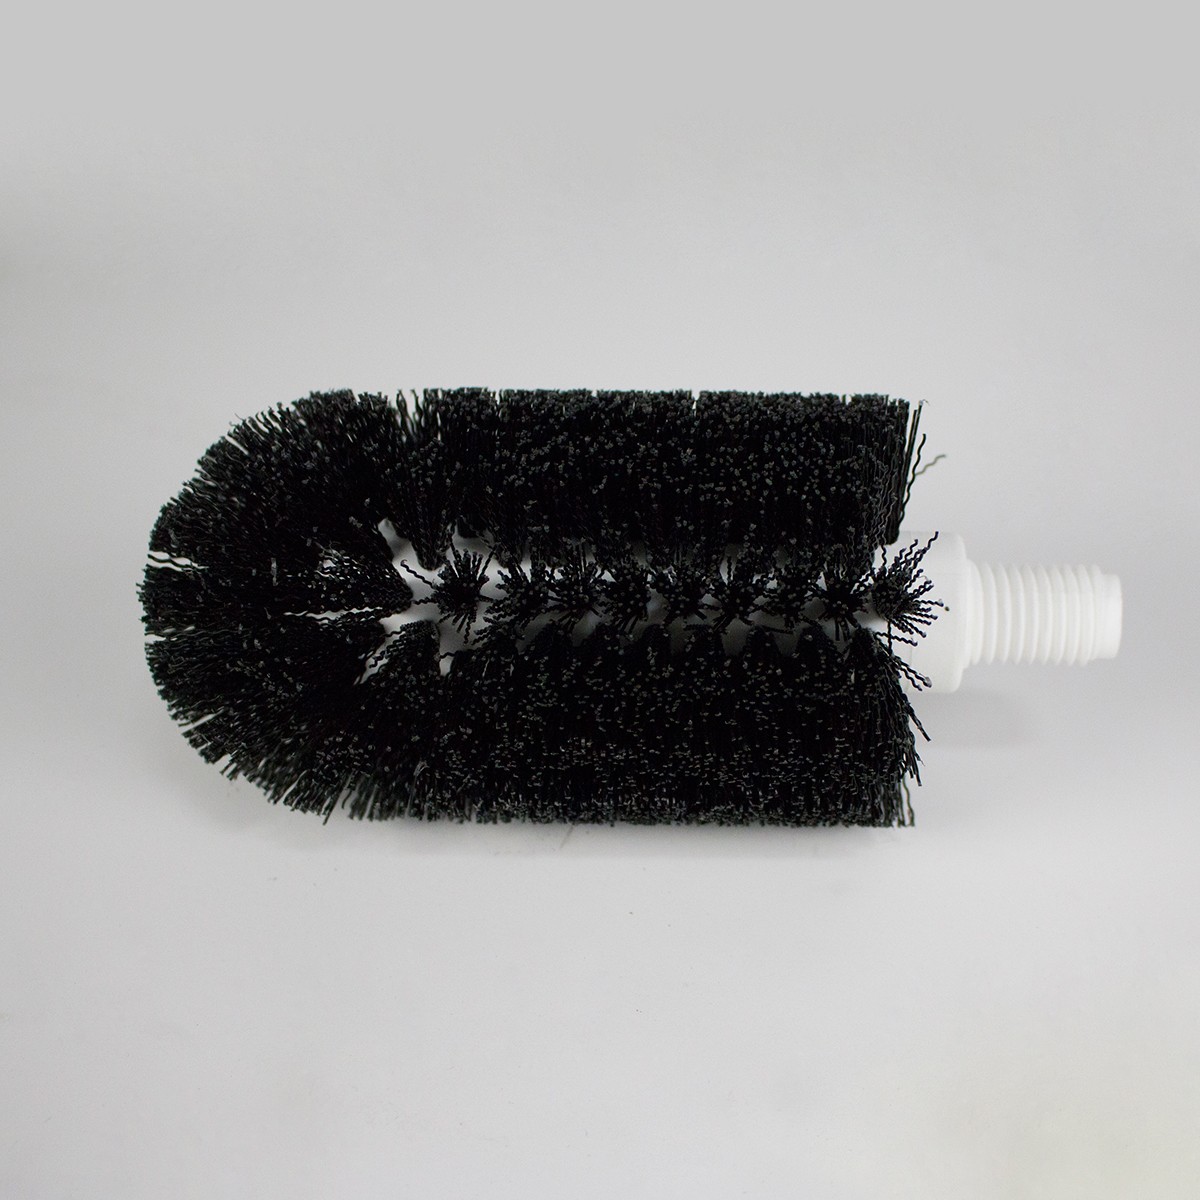 Premium Commercial Floor Drain Brushes Available in 3, 4, 5 and